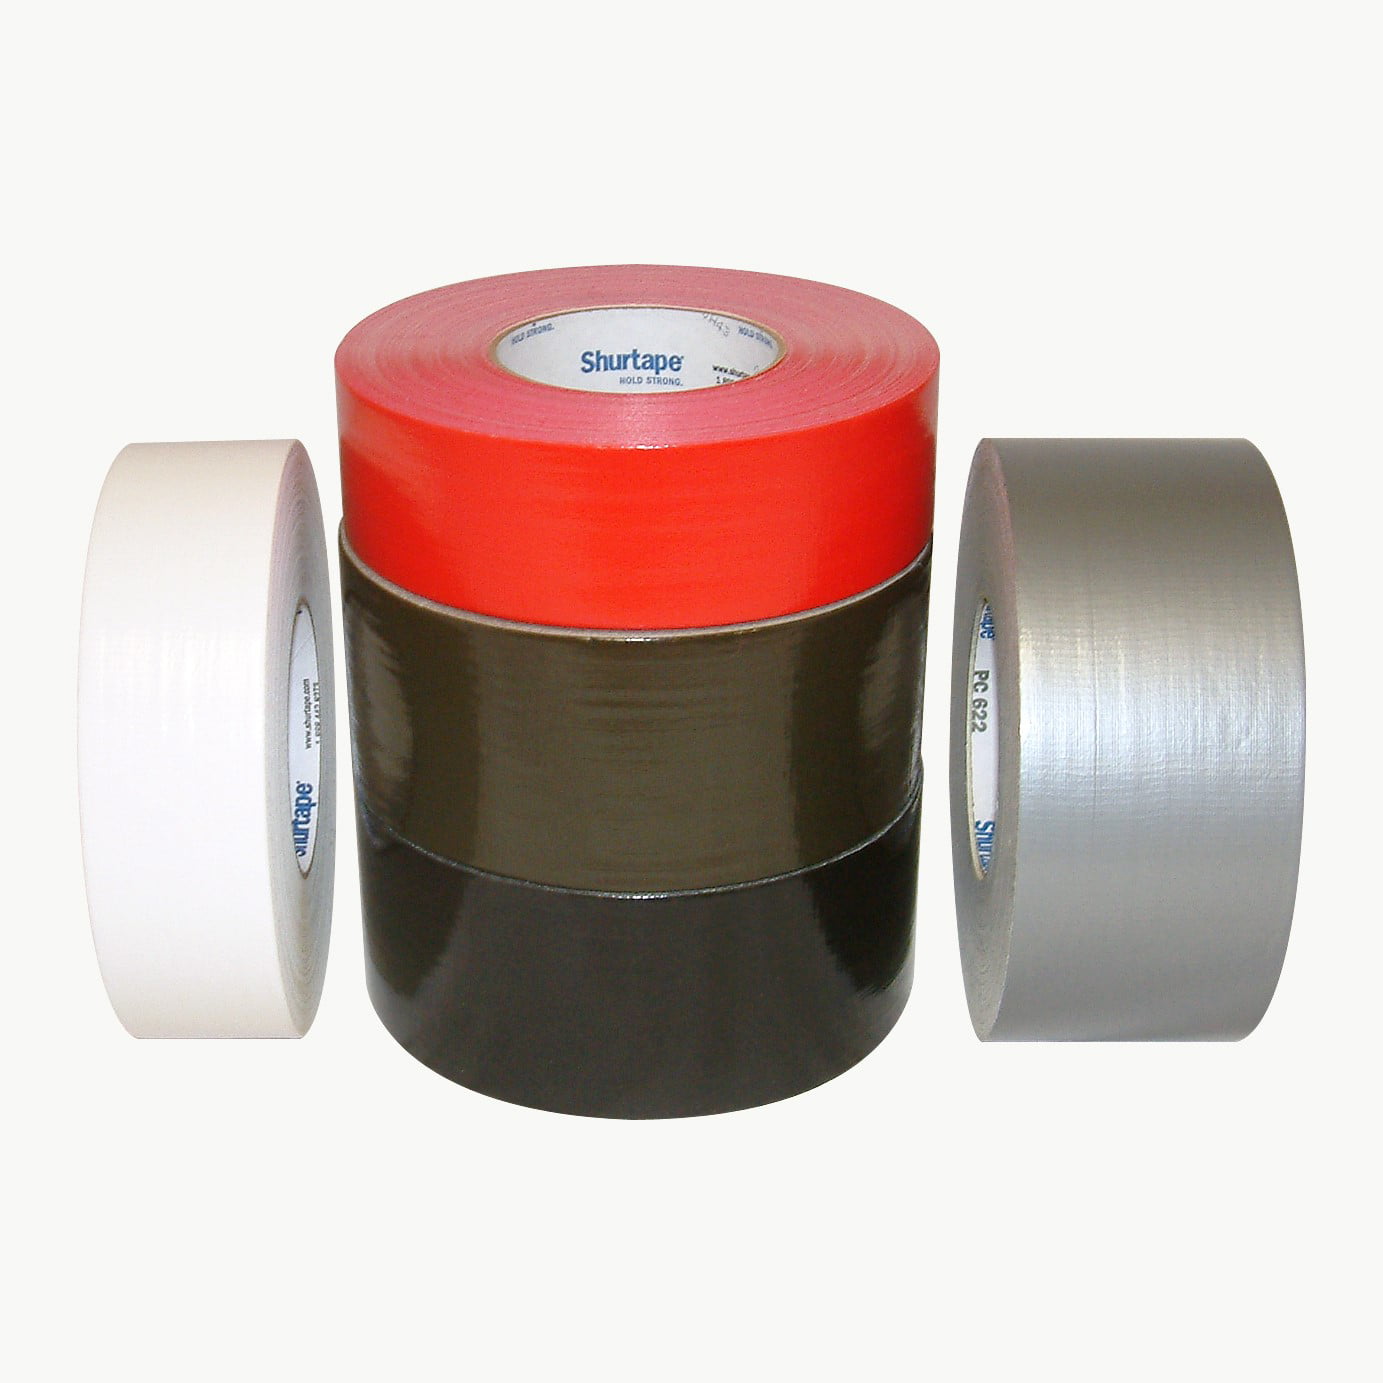 SHURTAPE PC-622 RED 1.5 in x 60 yds Premium-Grade Stucco Duct Tape 